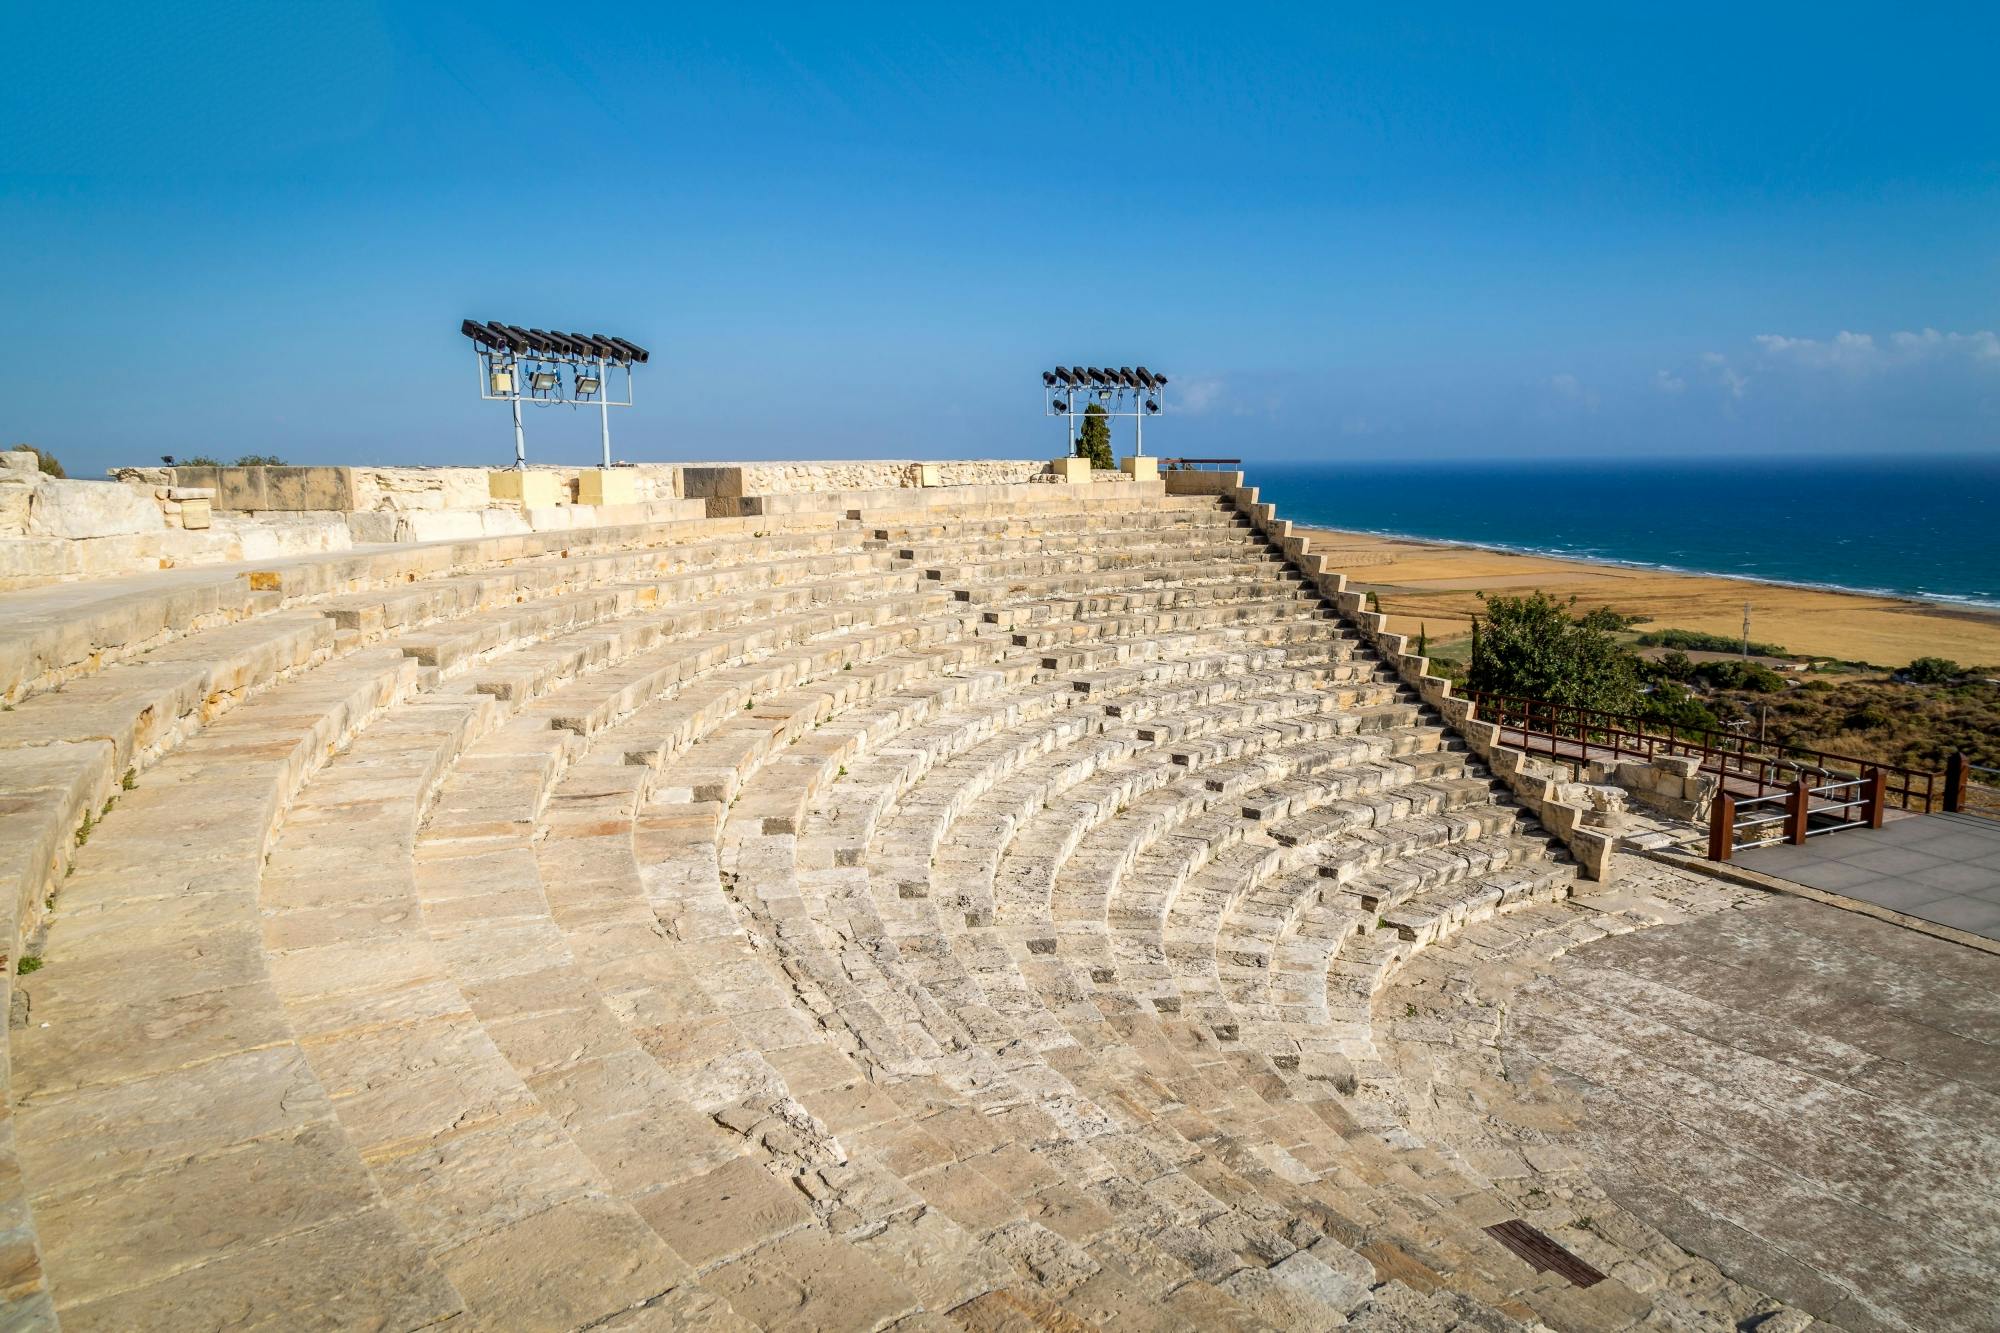 Ancient Kourion, Kolossi Castle, Omodos & Winery Tour from Limassol